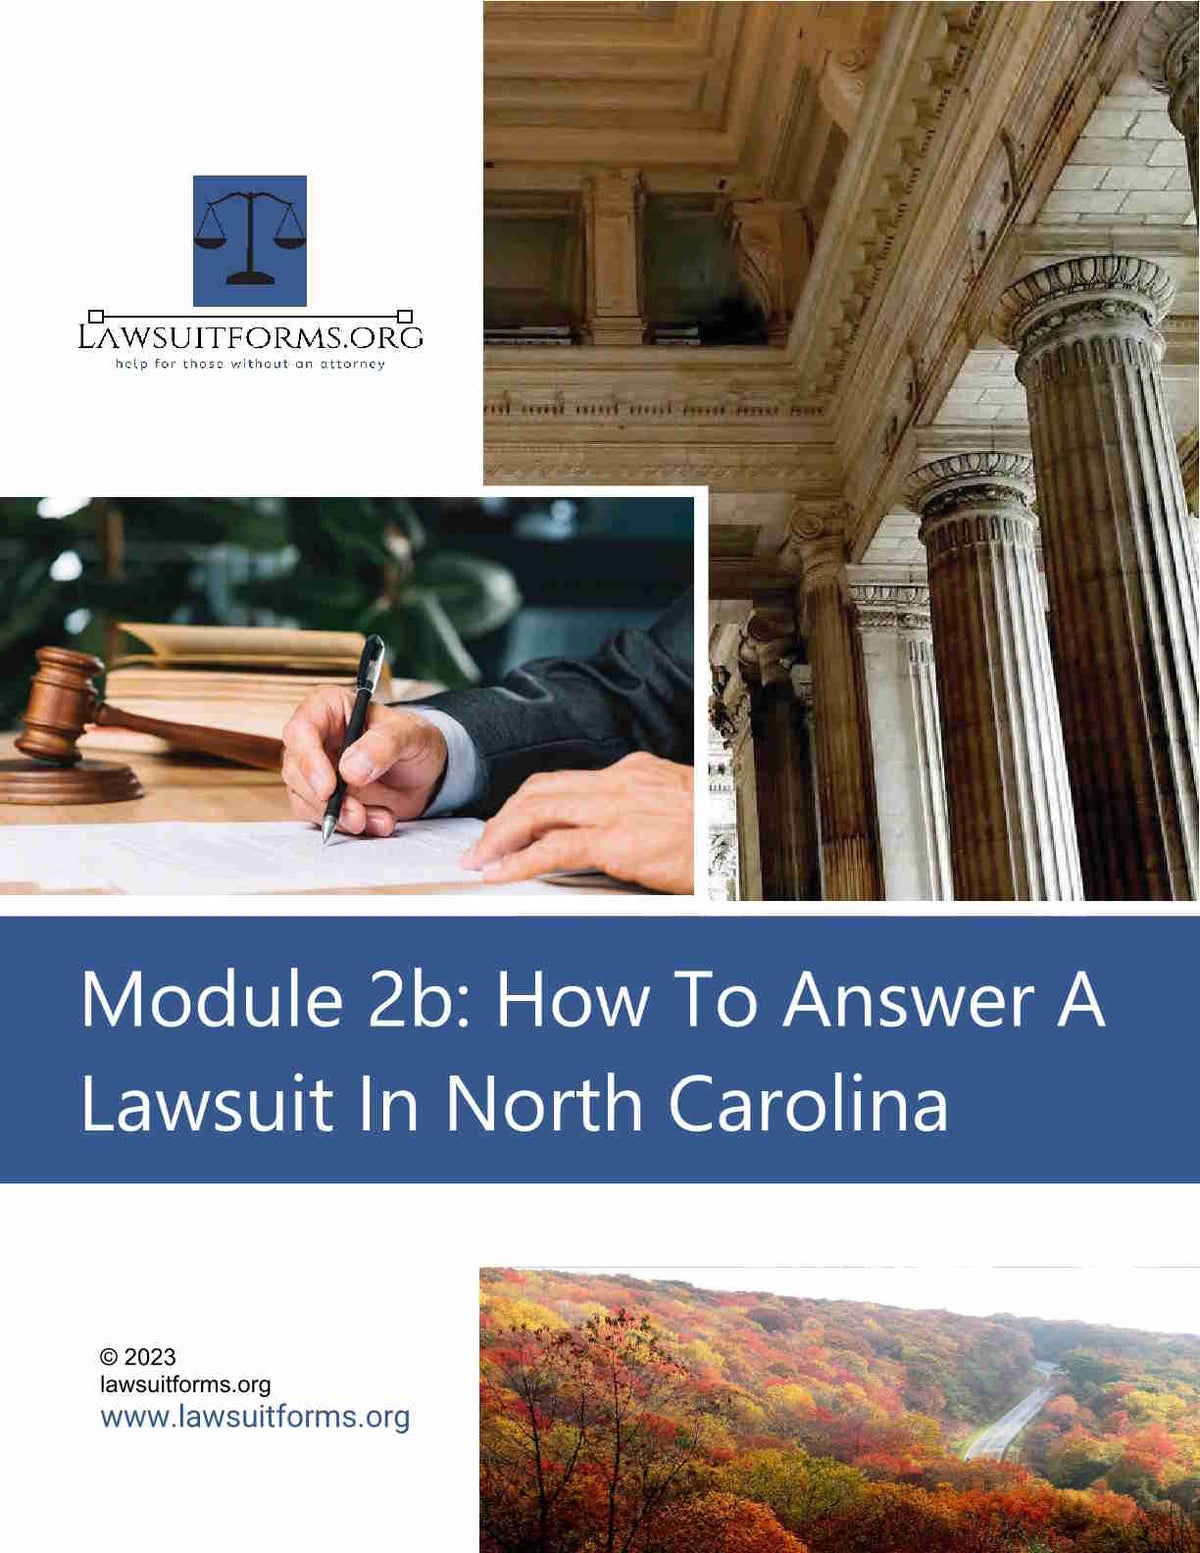 How to answer a lawsuit in North Carolina